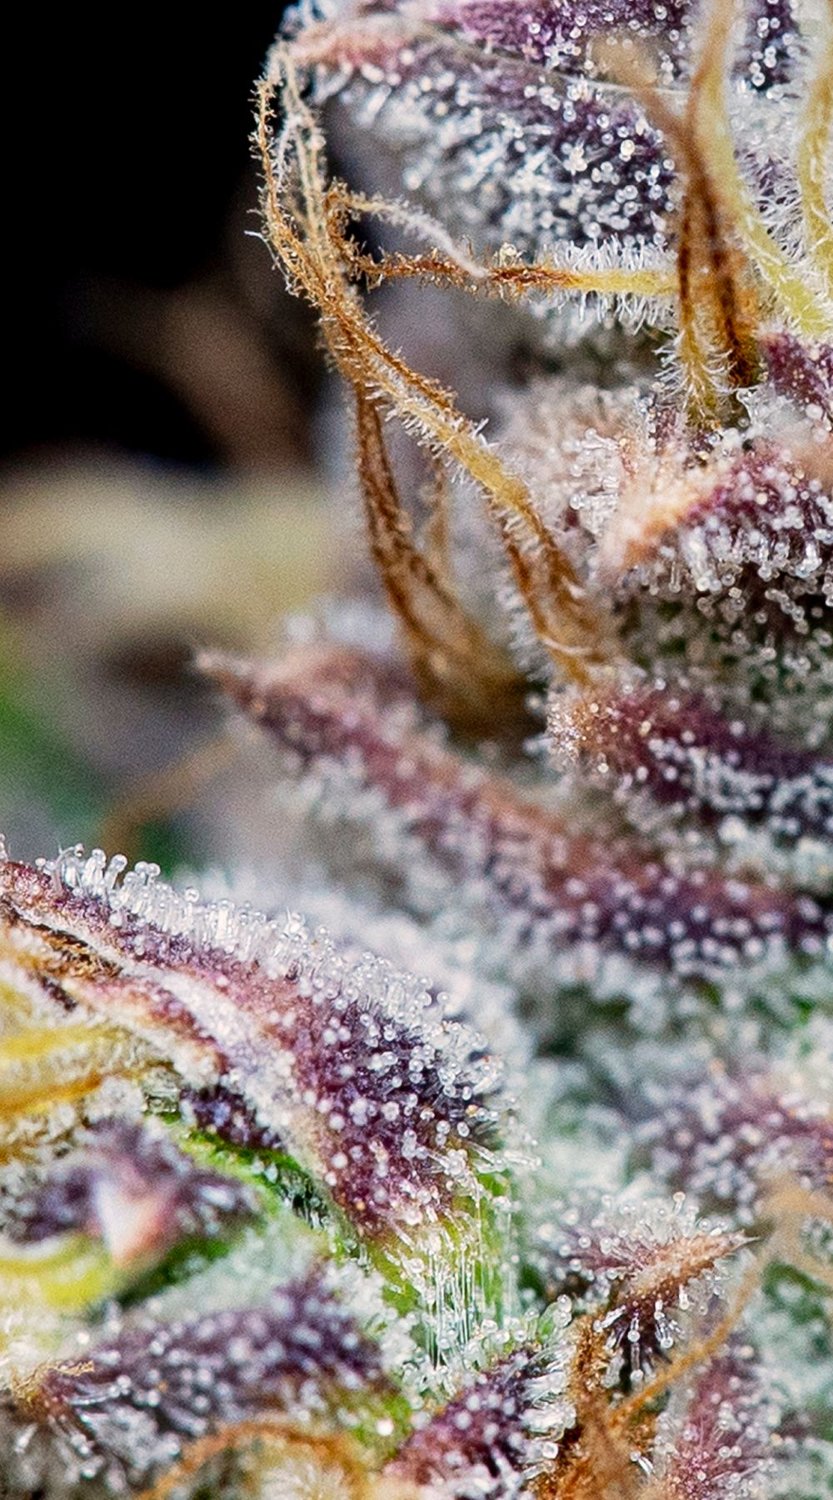 Juicy cannabis flower with lots of THC crystals